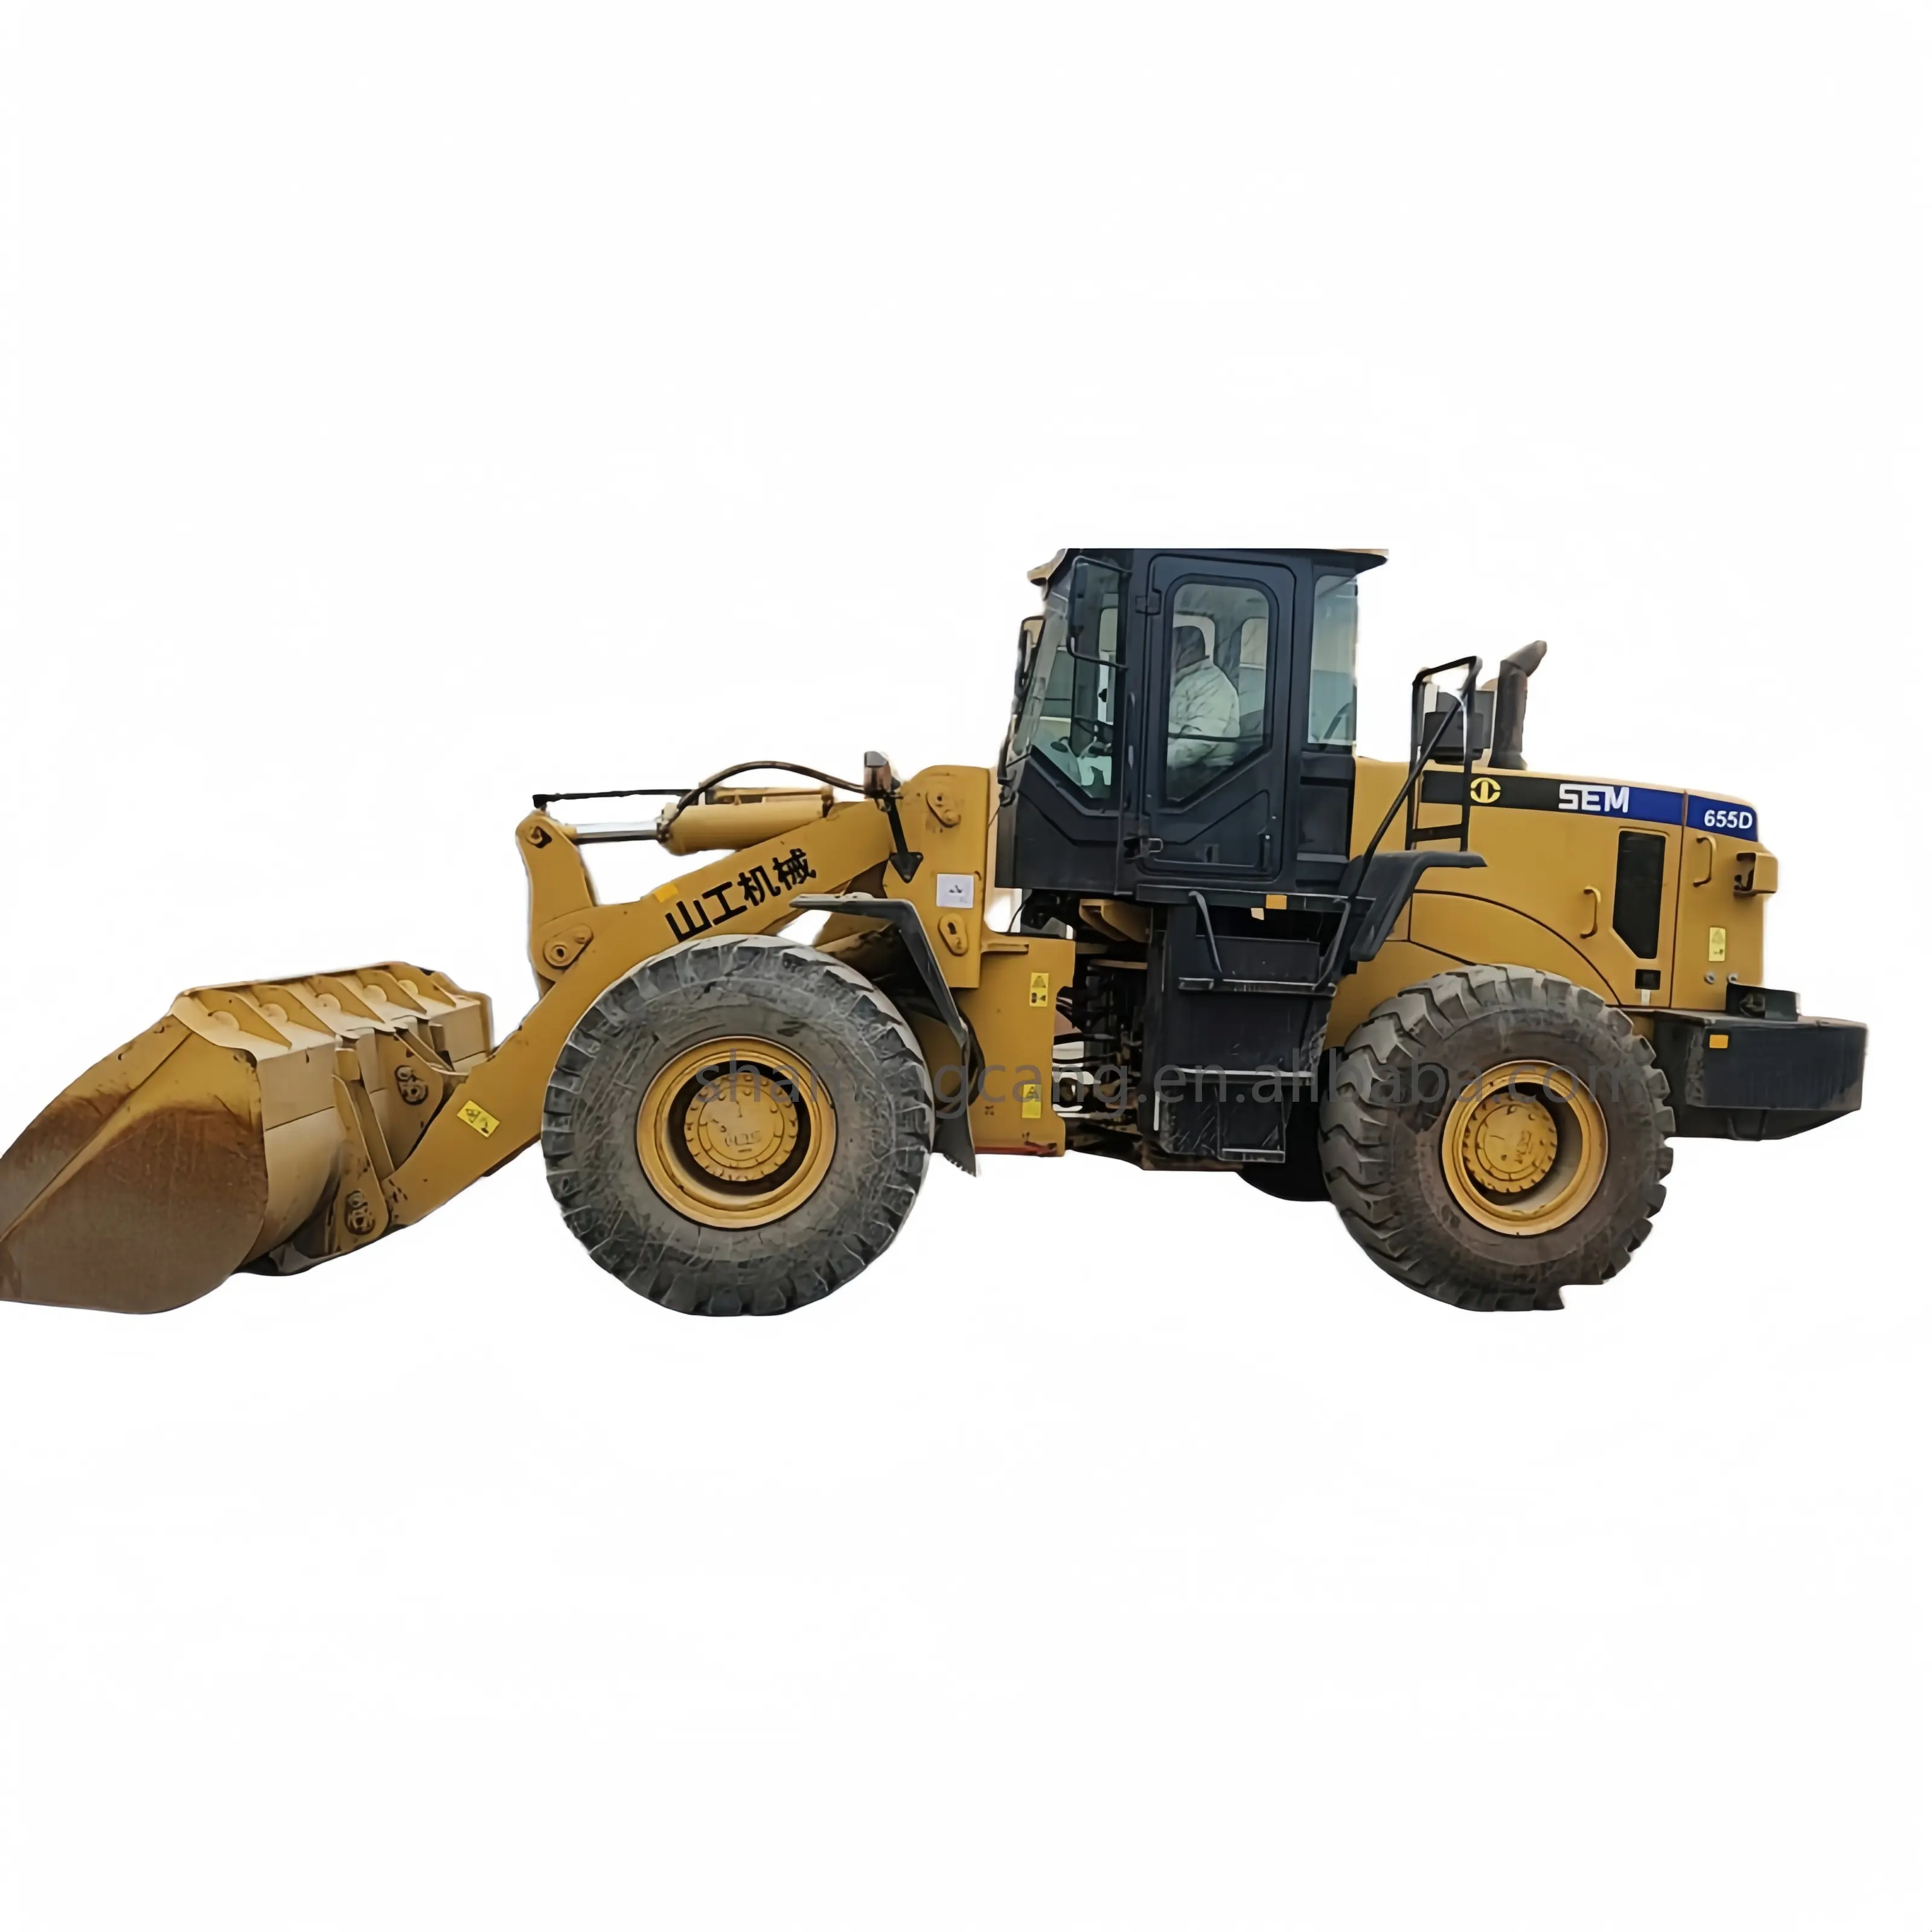 2020 Yera Second hand loader China Famous Brand SEM655D 5 Ton wheel loader in Shandong for hot sale